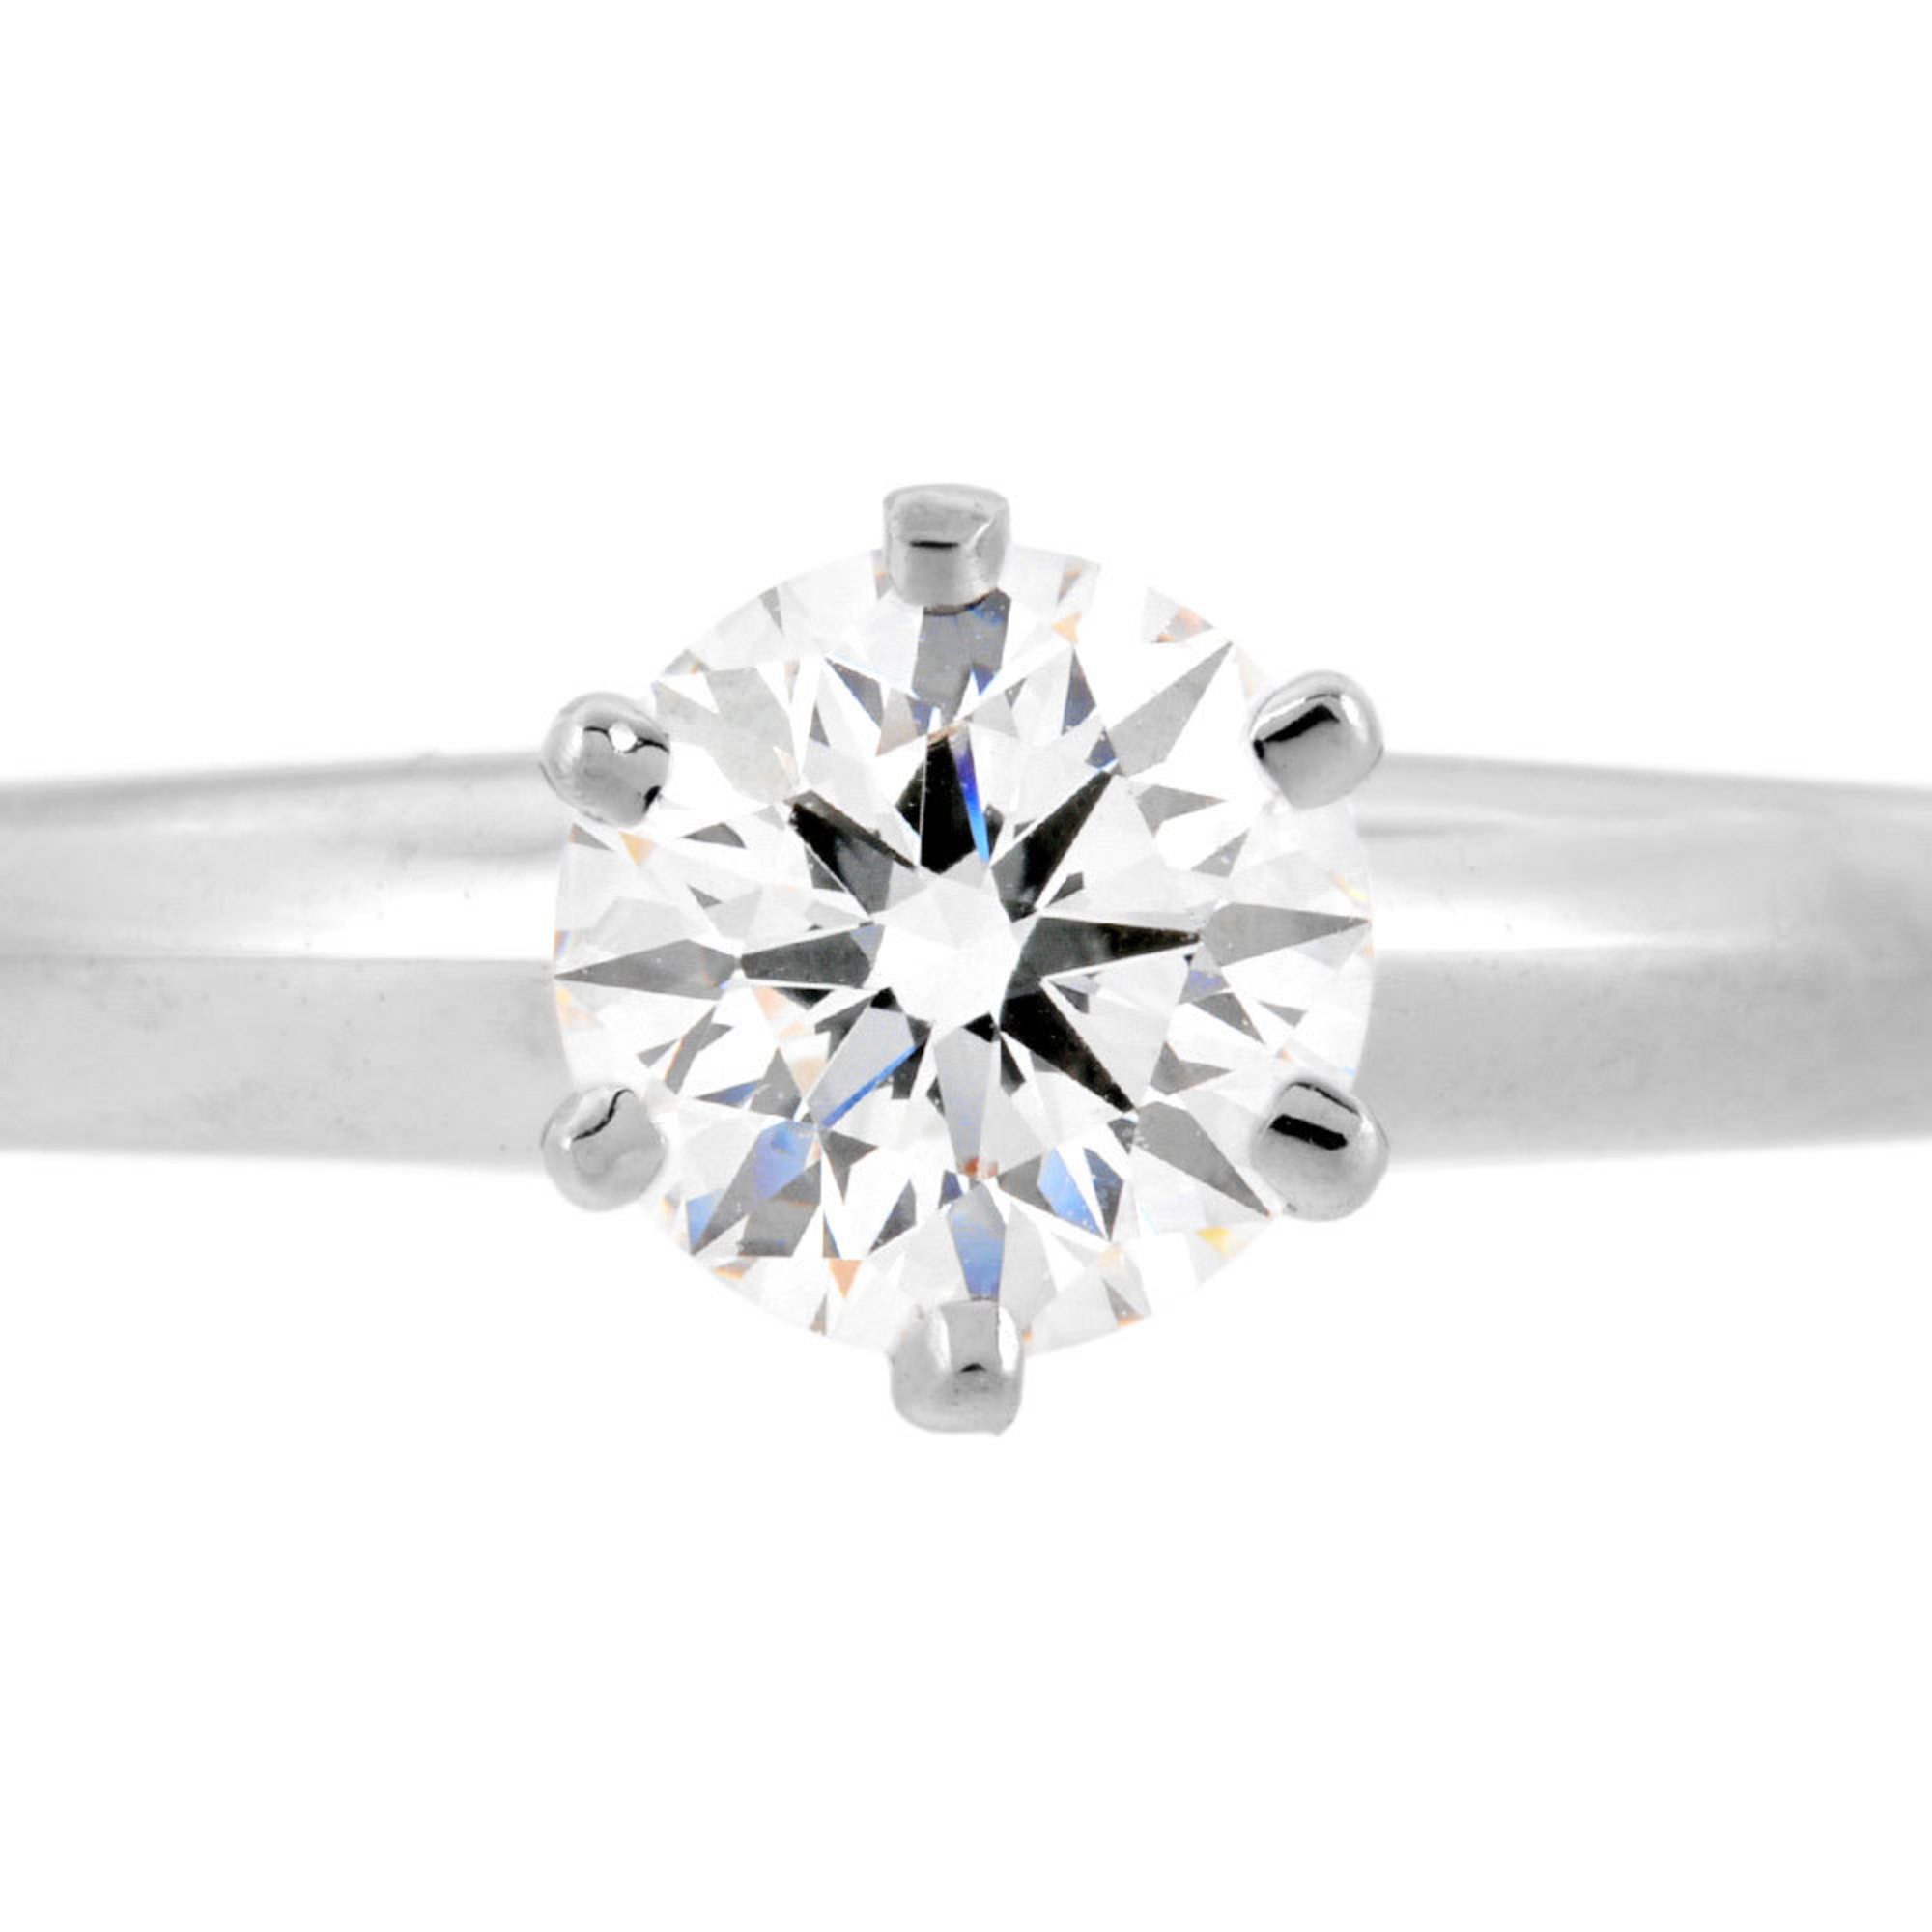 Tiffany & Co. Solitaire Ring, Diamond, 0.54ct, Size 11, Pt950, 4.0g, Women's